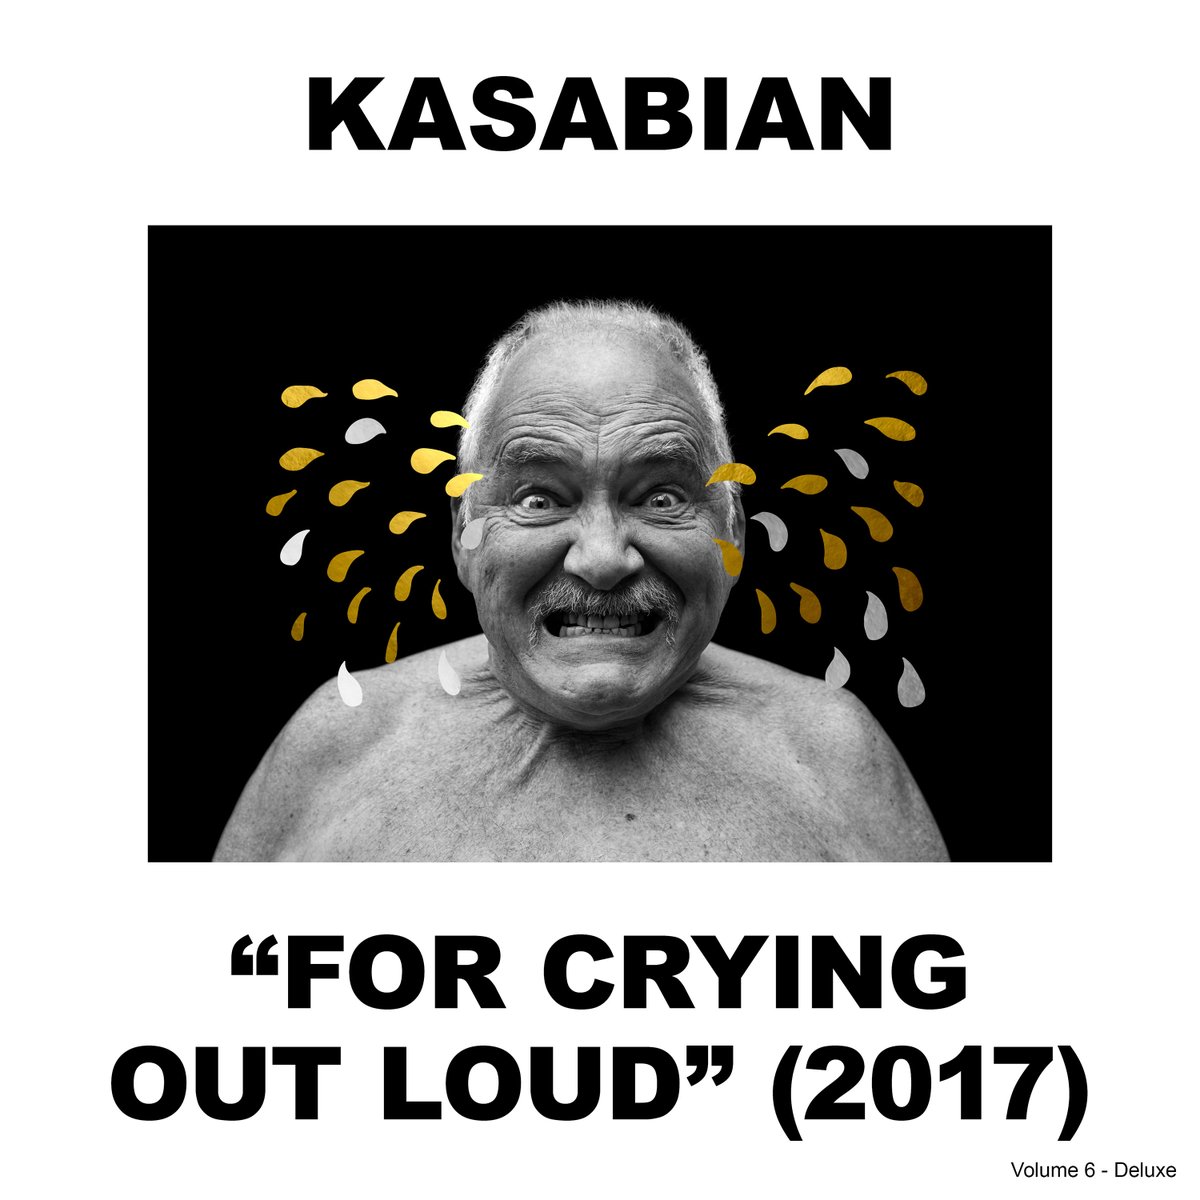 Kasabian - For Crying Out Loud (2017) #AlternativeDance  #IndieRock #Leicester #UK🇬🇧 #10s  #2010s #ColumbiaRecords